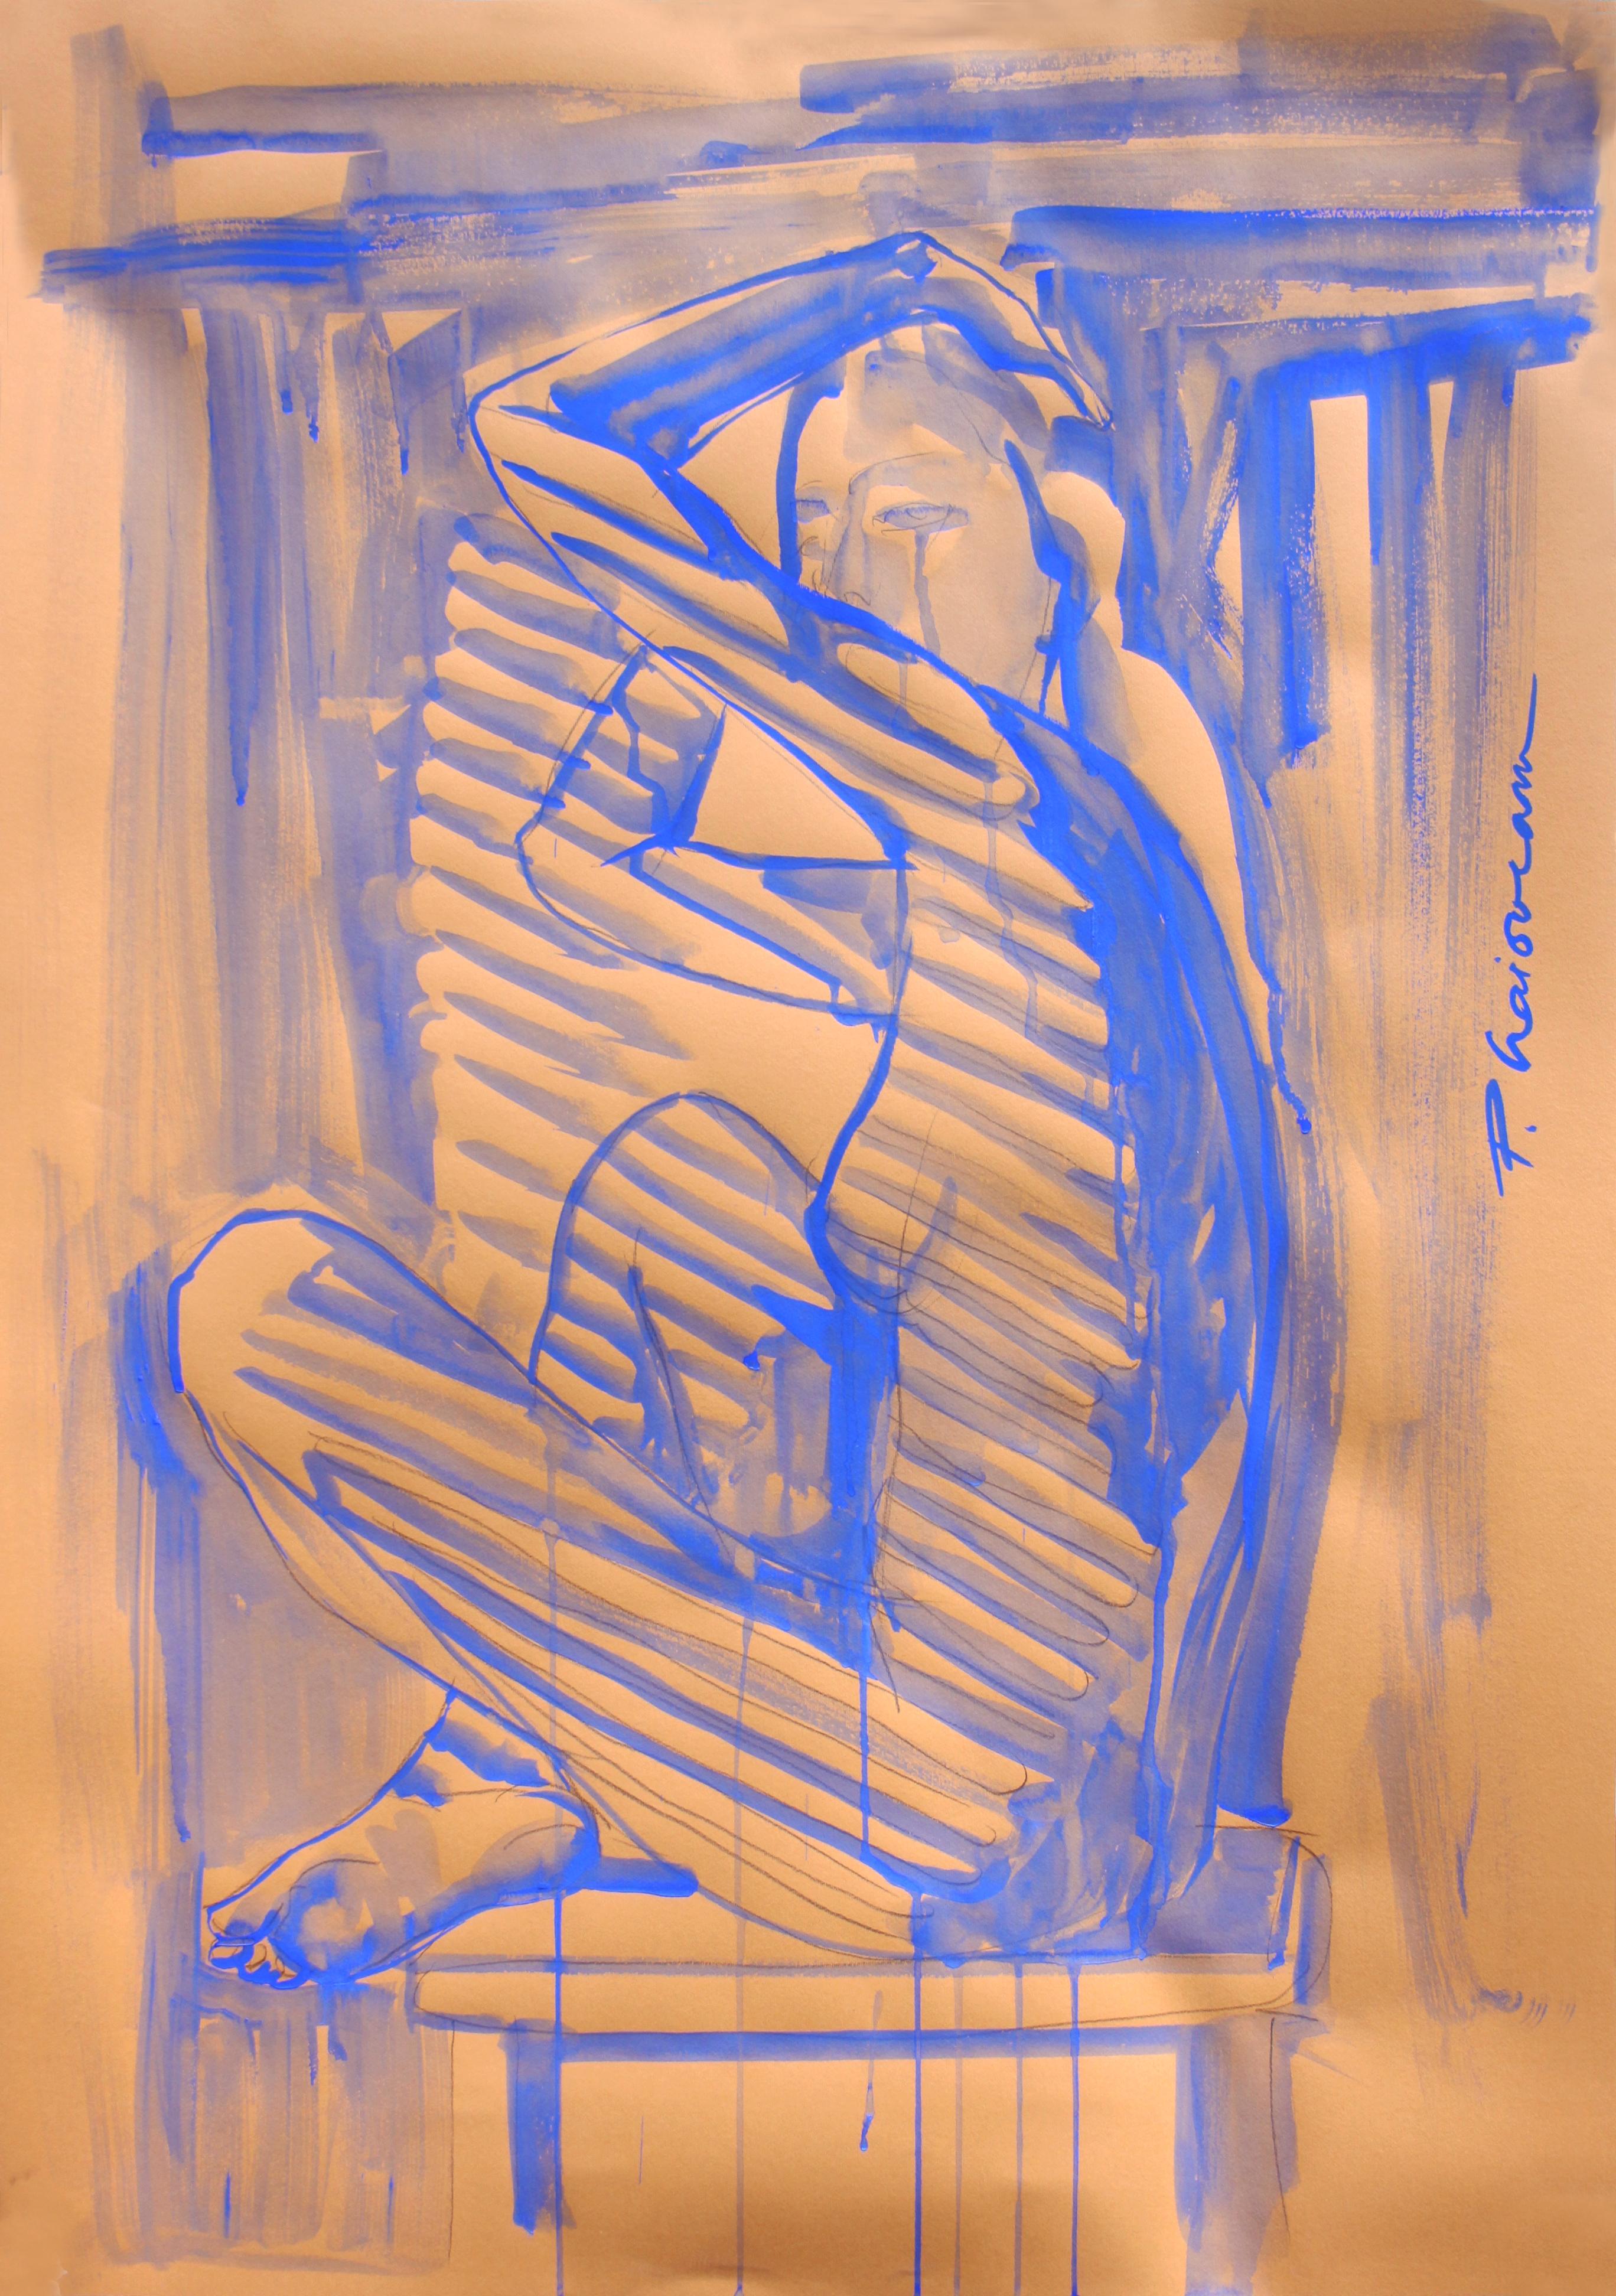 "Sensory Experience", pencil and ultramarine tempera on paper, inspired by Matisse.
Part of Nude in Interior series.
Large drawing. Shipped rolled in a tube, from Florida, US.

Artist Statement
"I started by painting interiors, being interested in